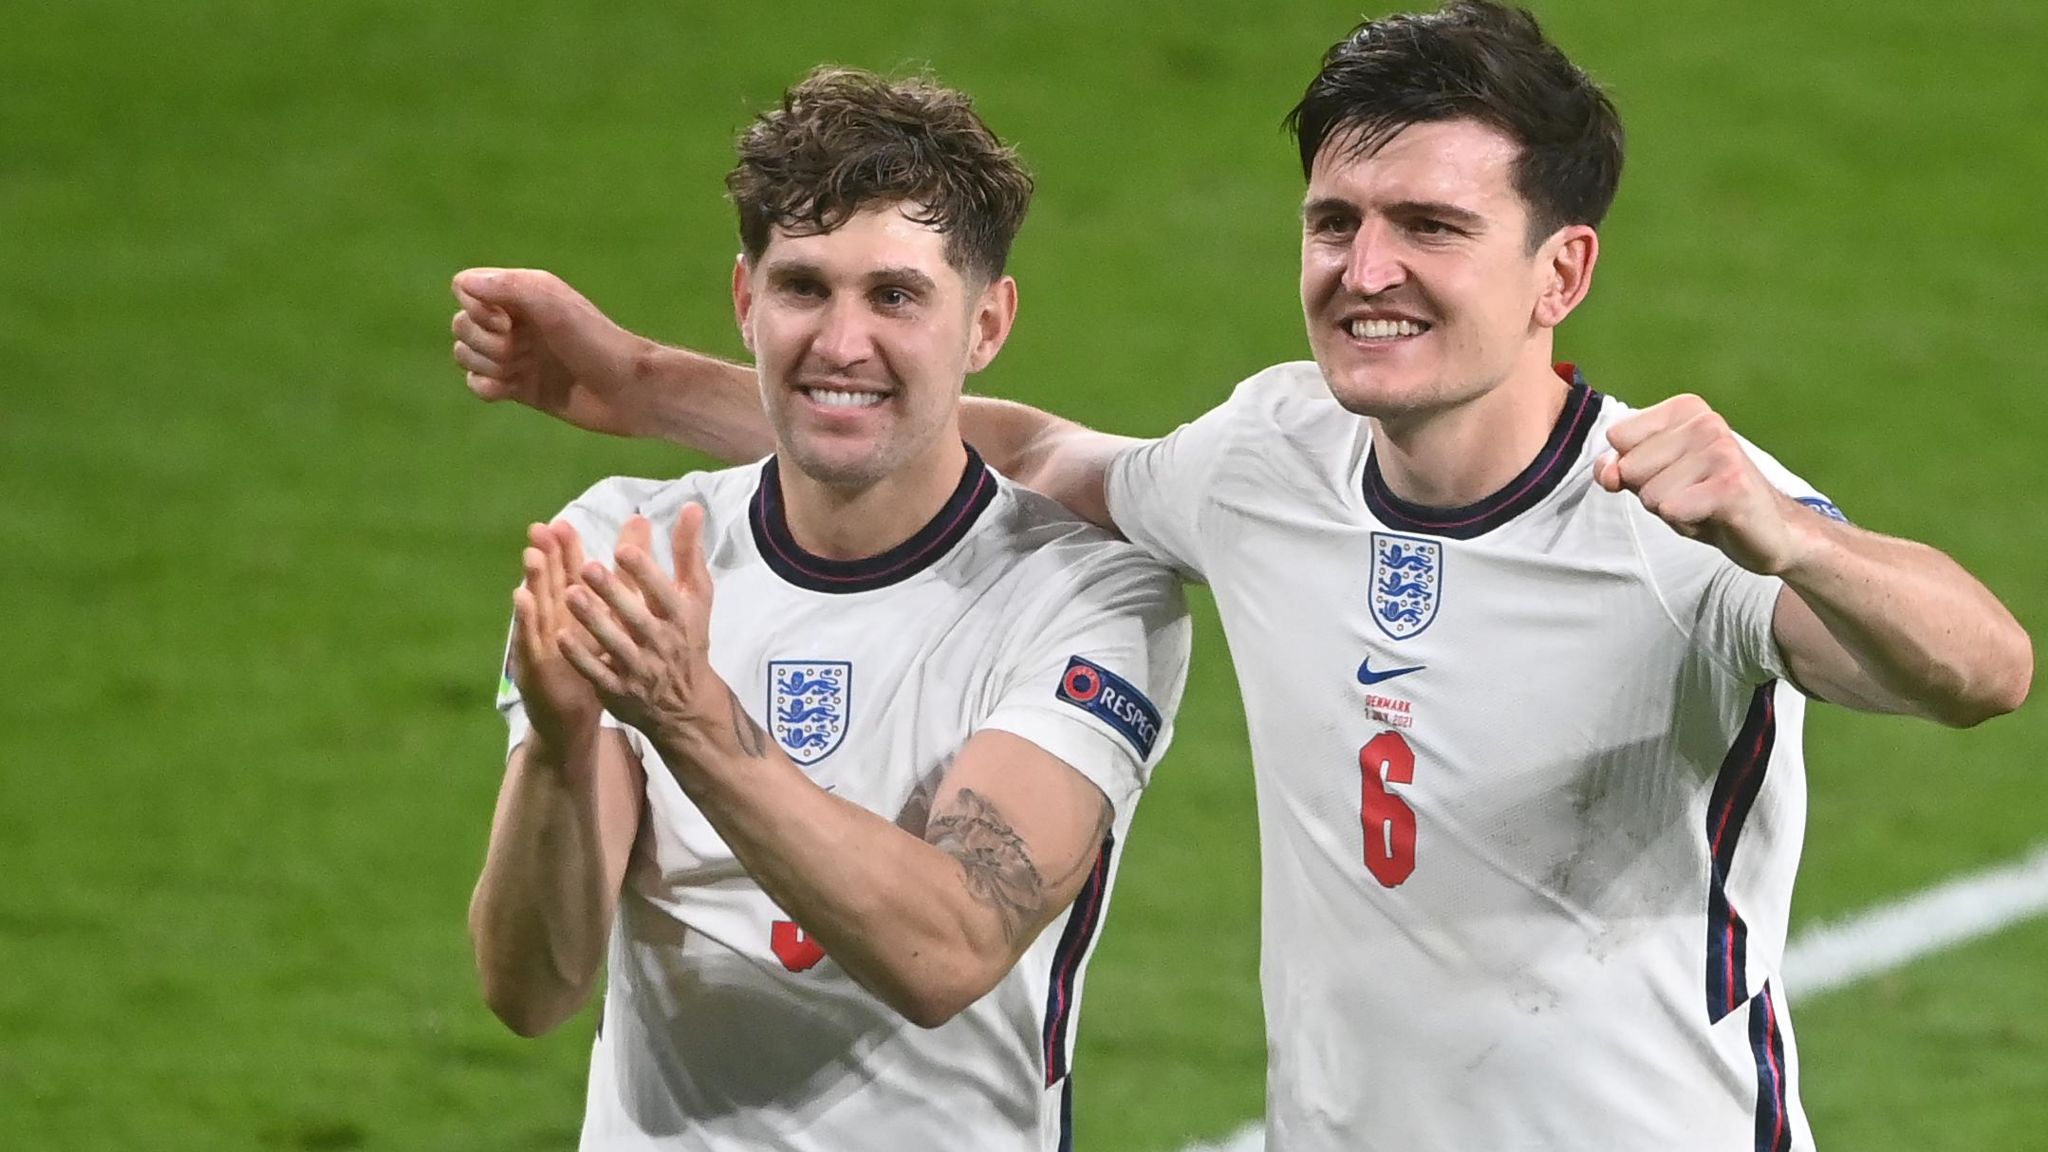 John Stones and Harry Maguire among world's best - Southgate - BBC Sport